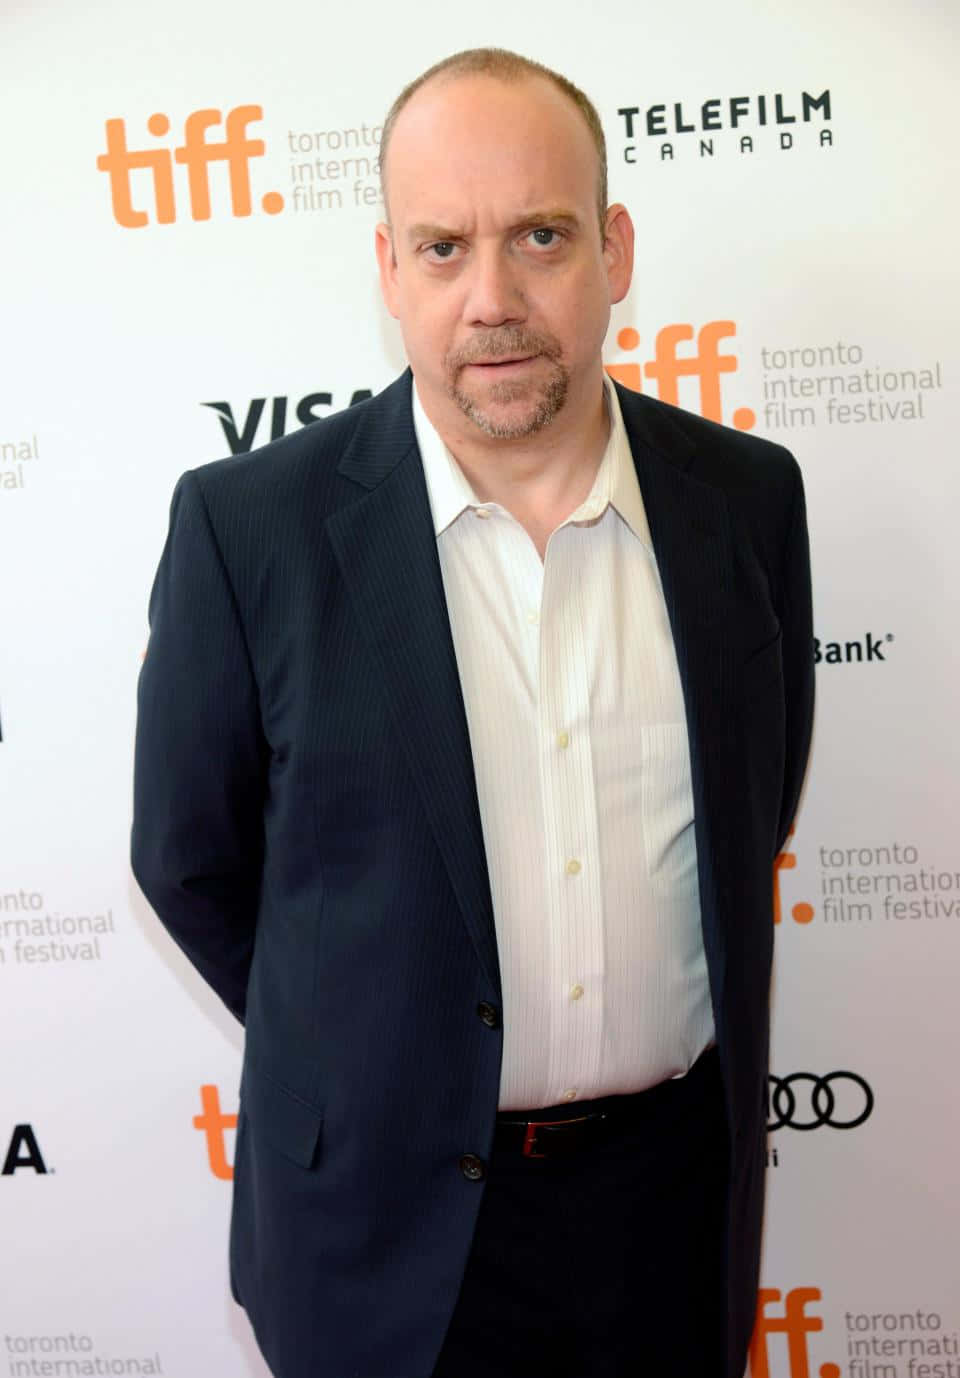 Actorpaul Giamatti Is Known For His Incredibly Diverse Range Of Roles In Both Film And Television. He Has Appeared In A Wide Array Of Genres, From Dramas Such As 